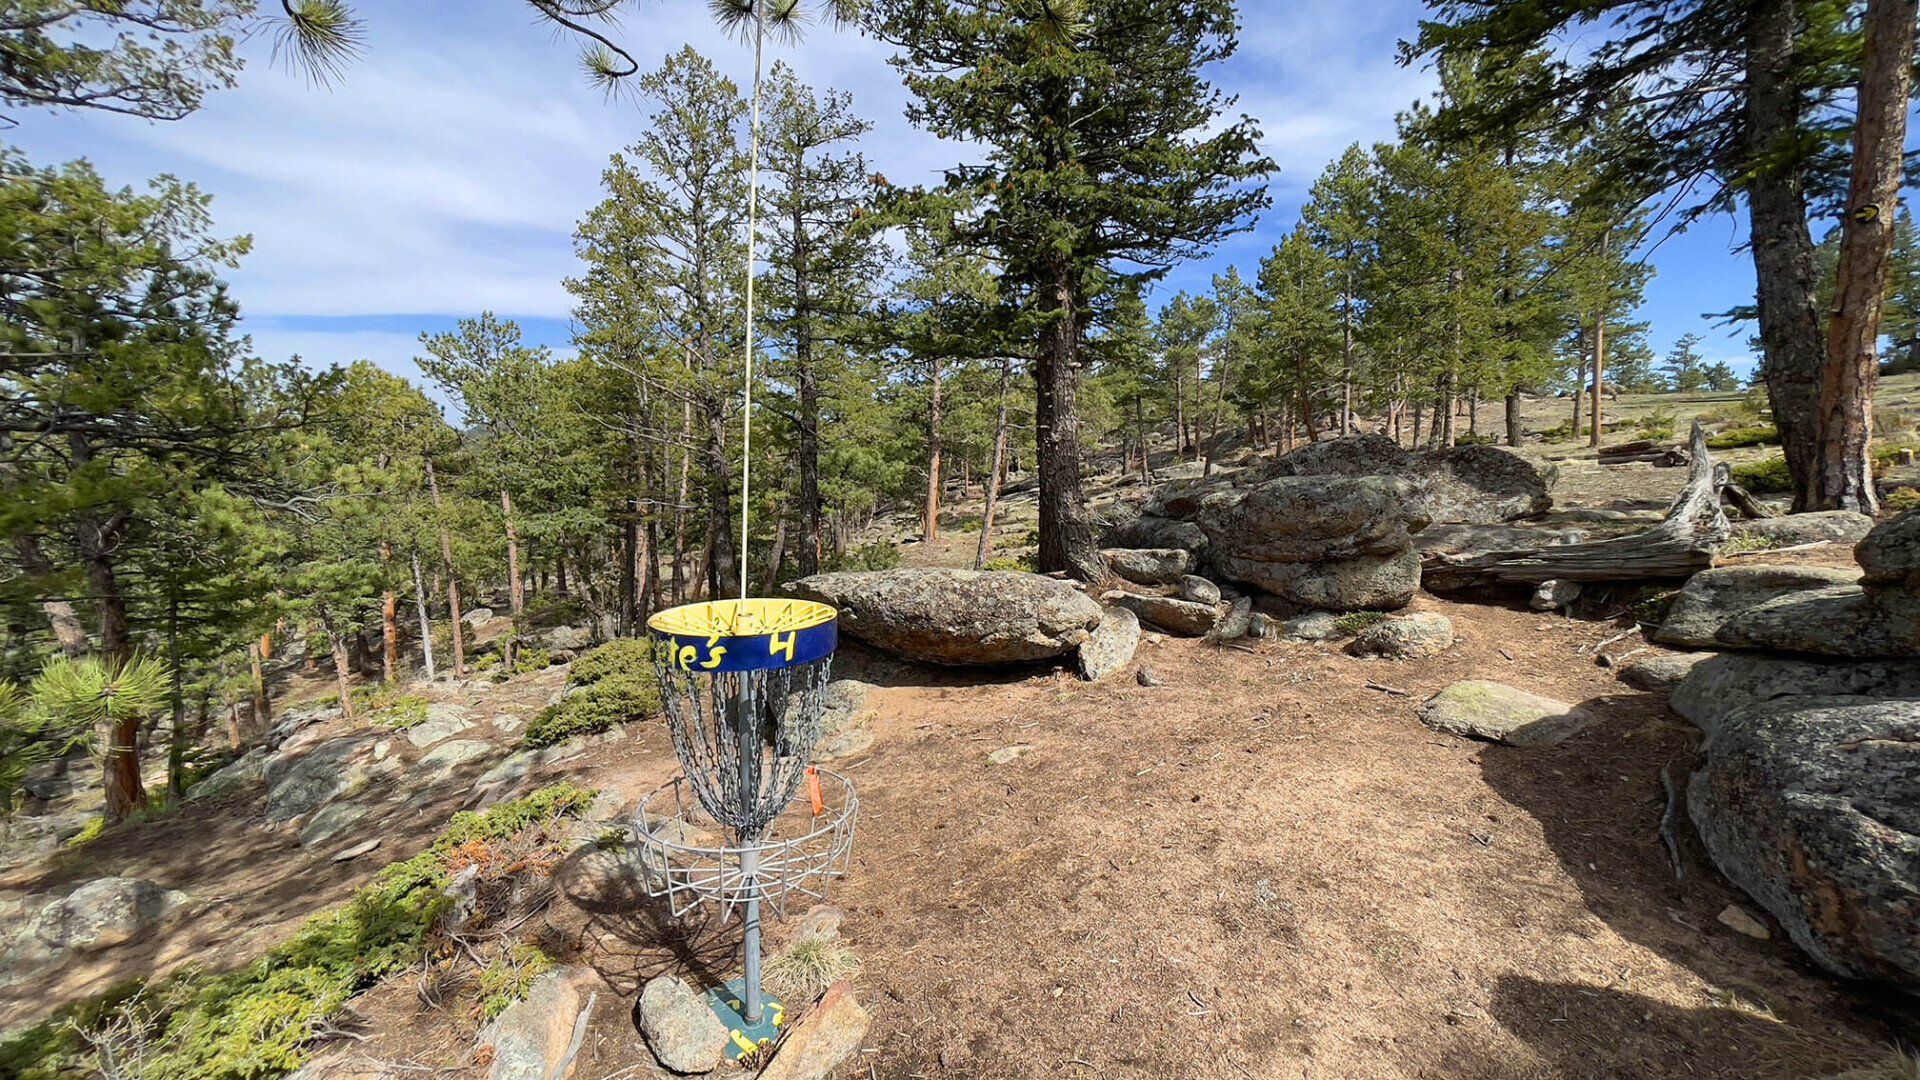 New disc golf hole 5 basket at Sundance Trail Guest Ranch May 2022